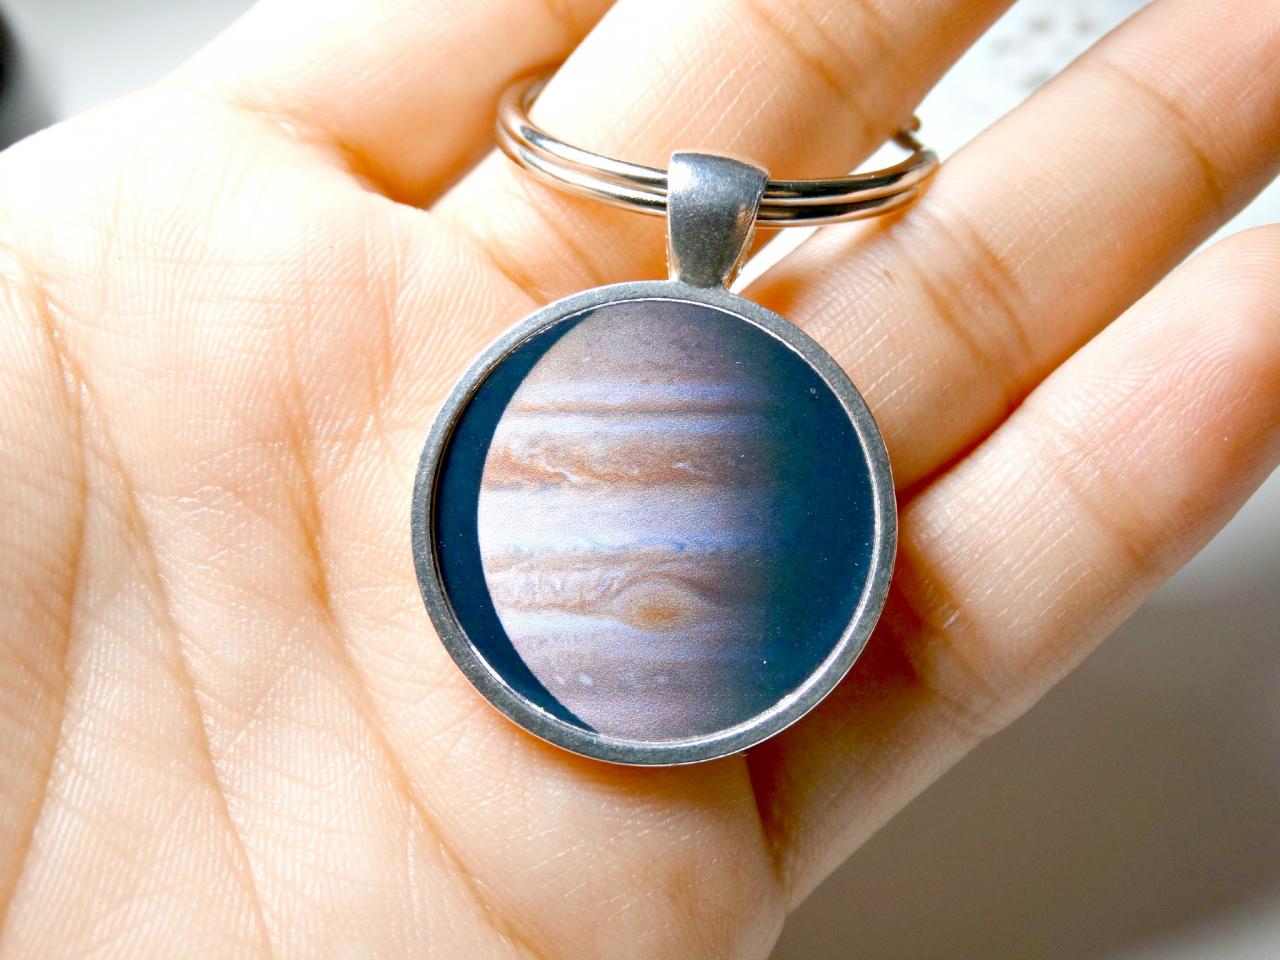 Universe Collection Glass Keychain